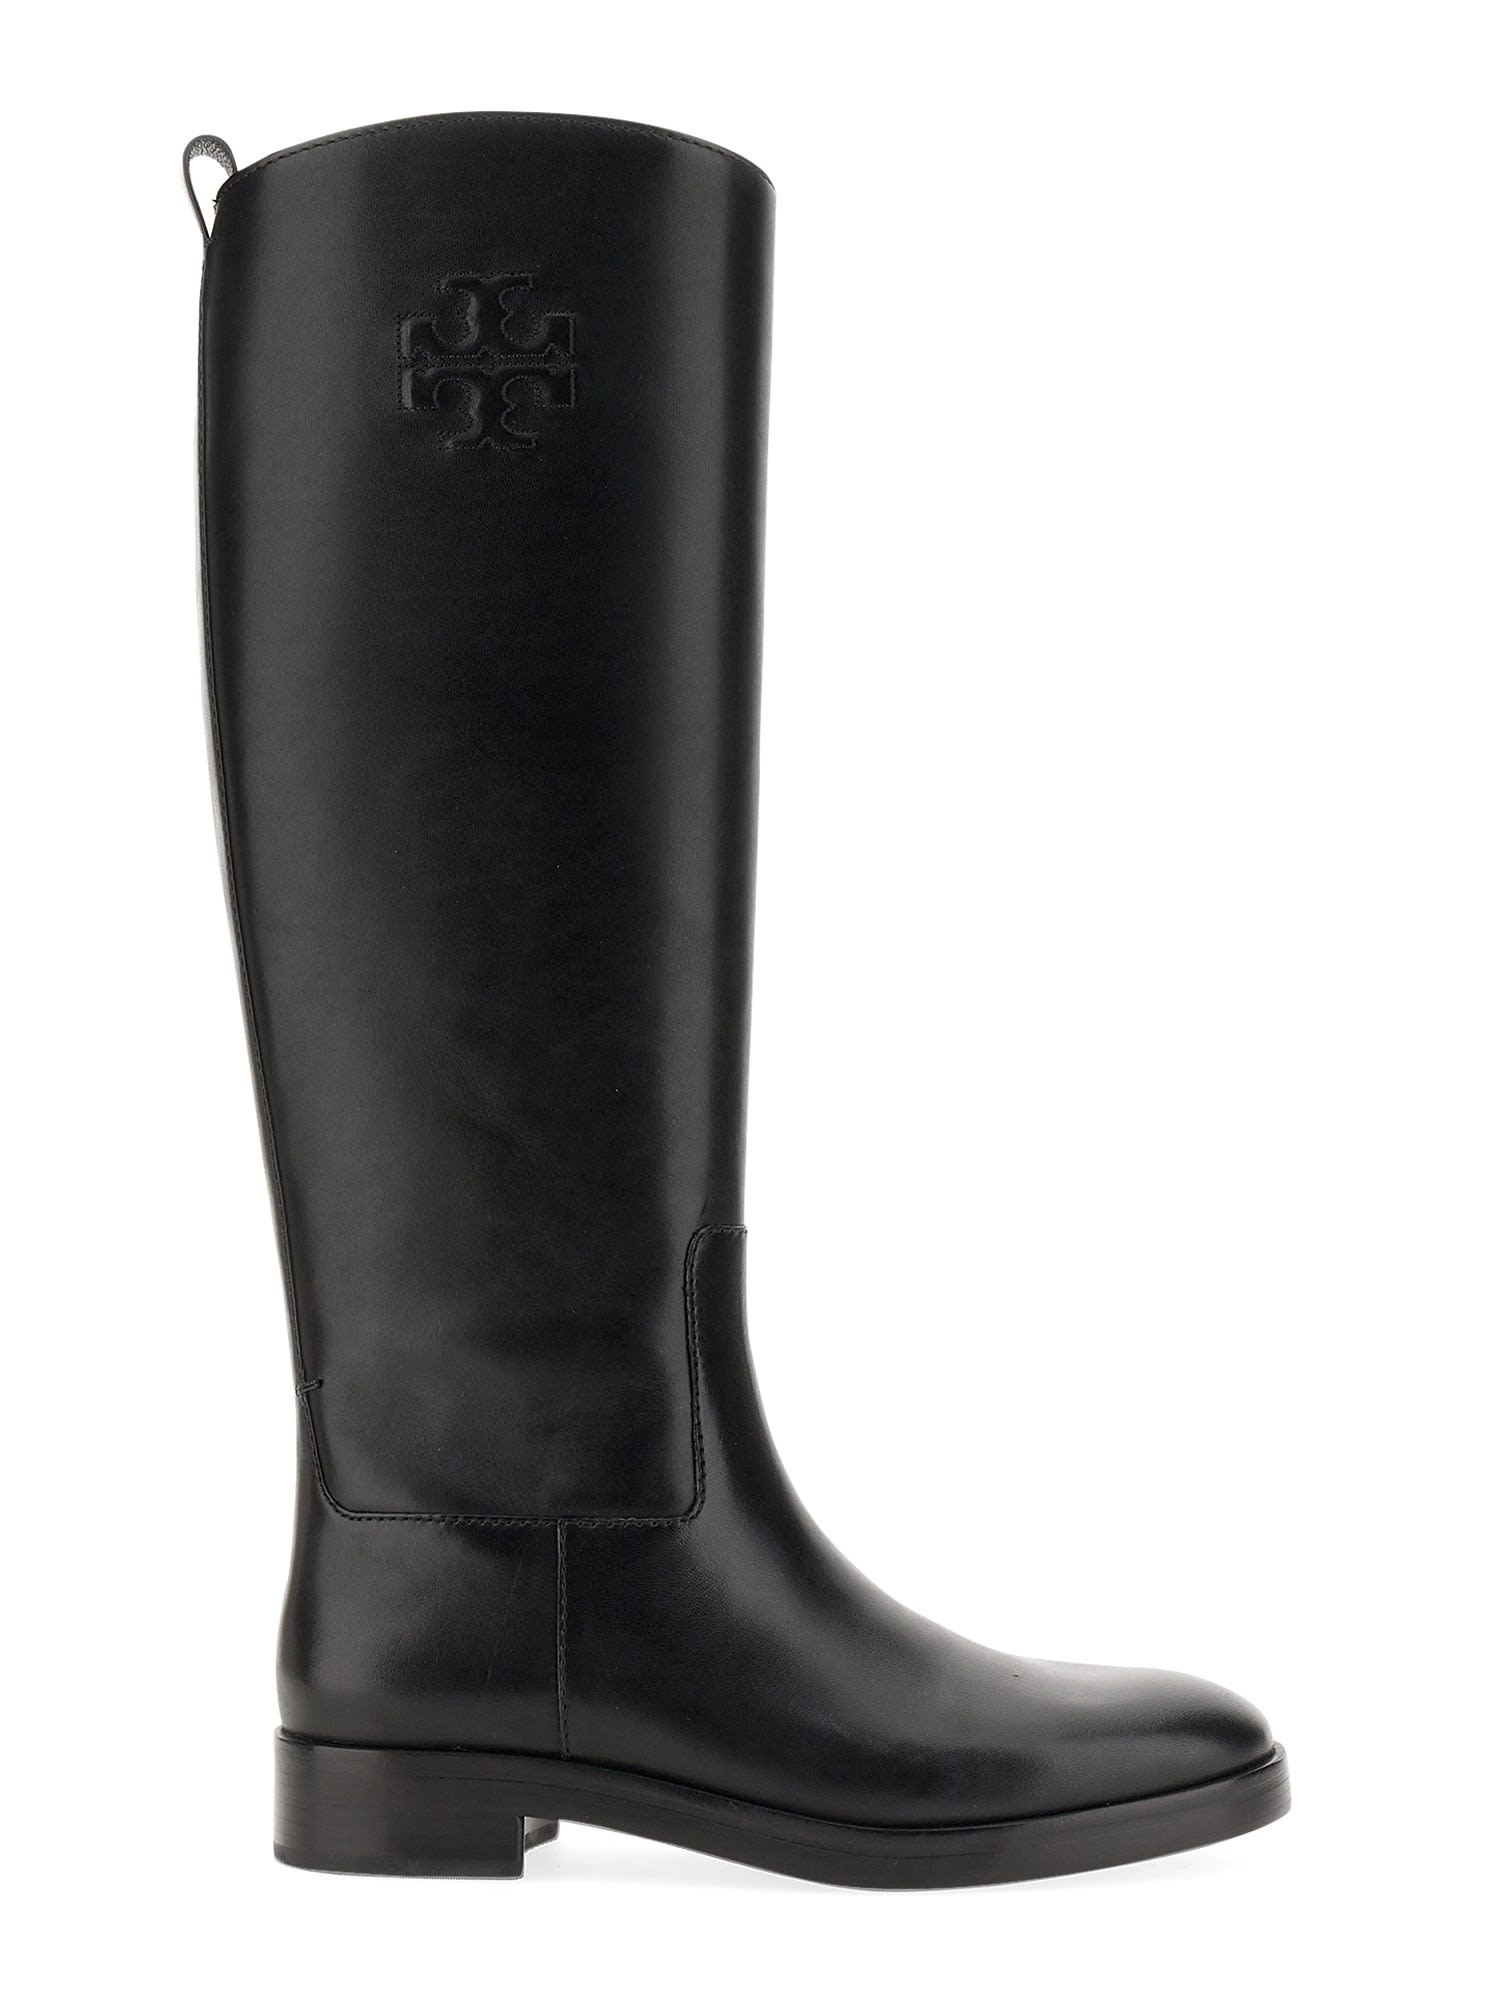 Tory Burch Ruby Boots.